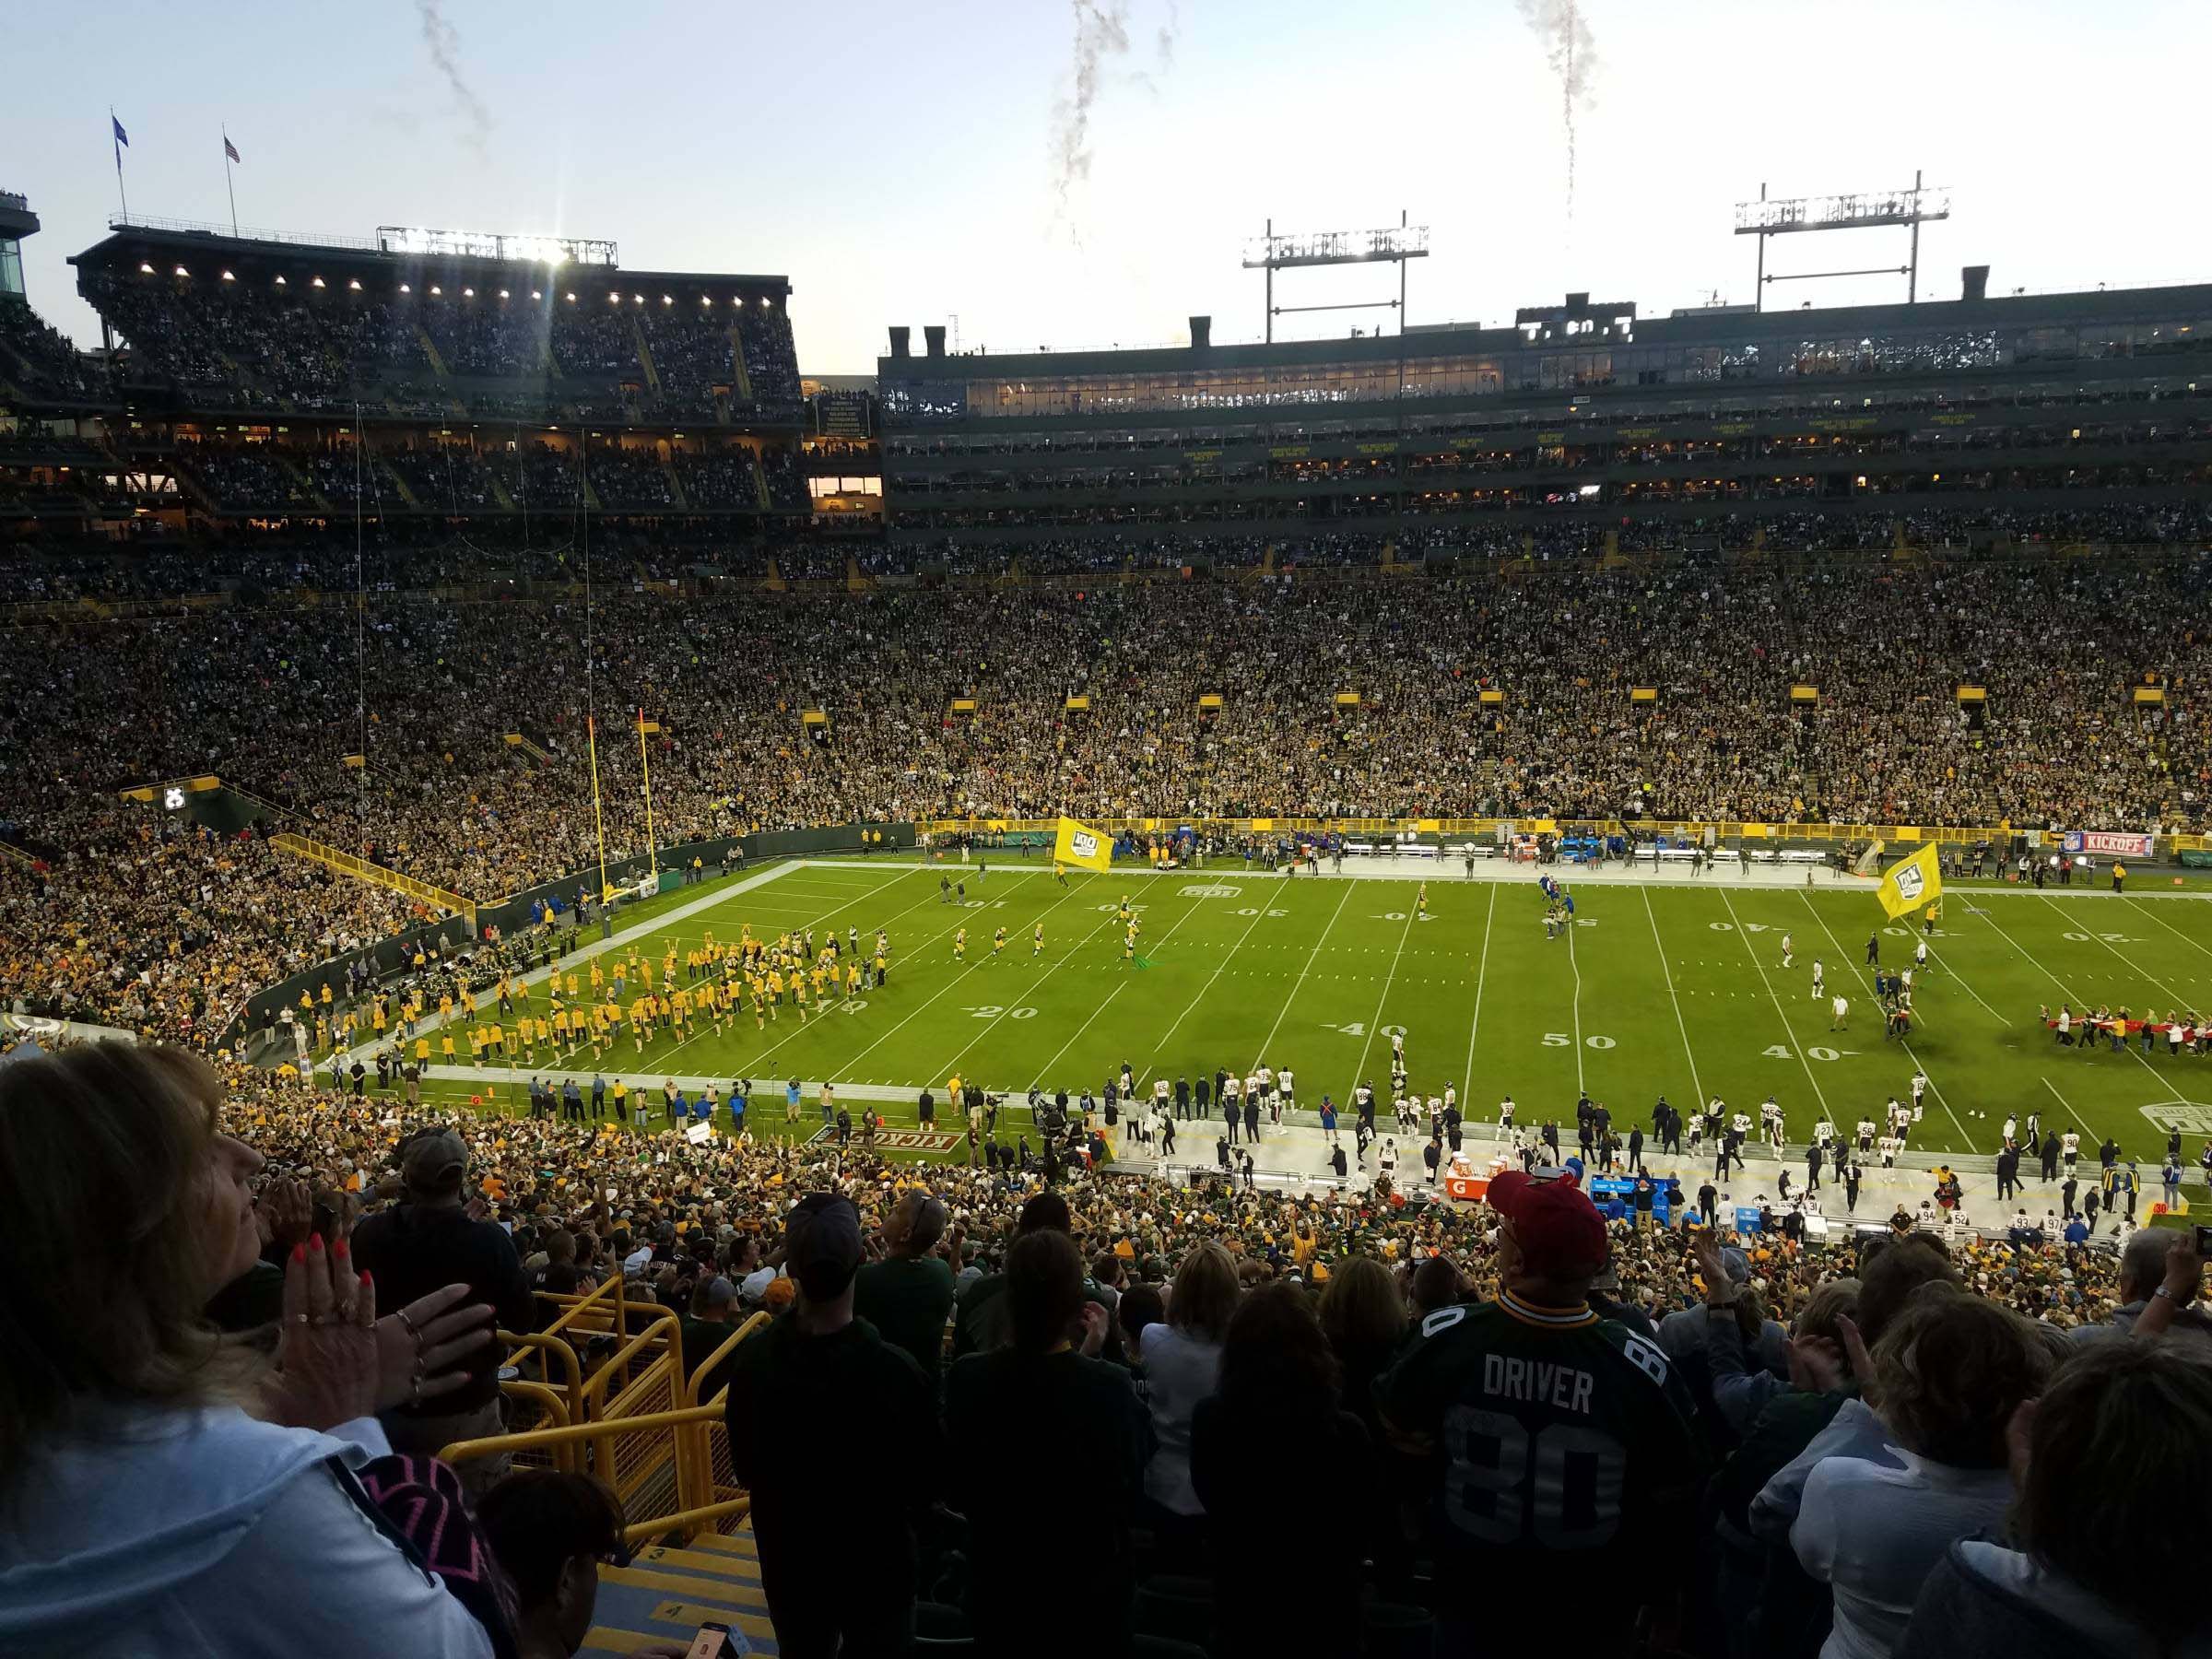 The view from Section 131 at Lambeau Field